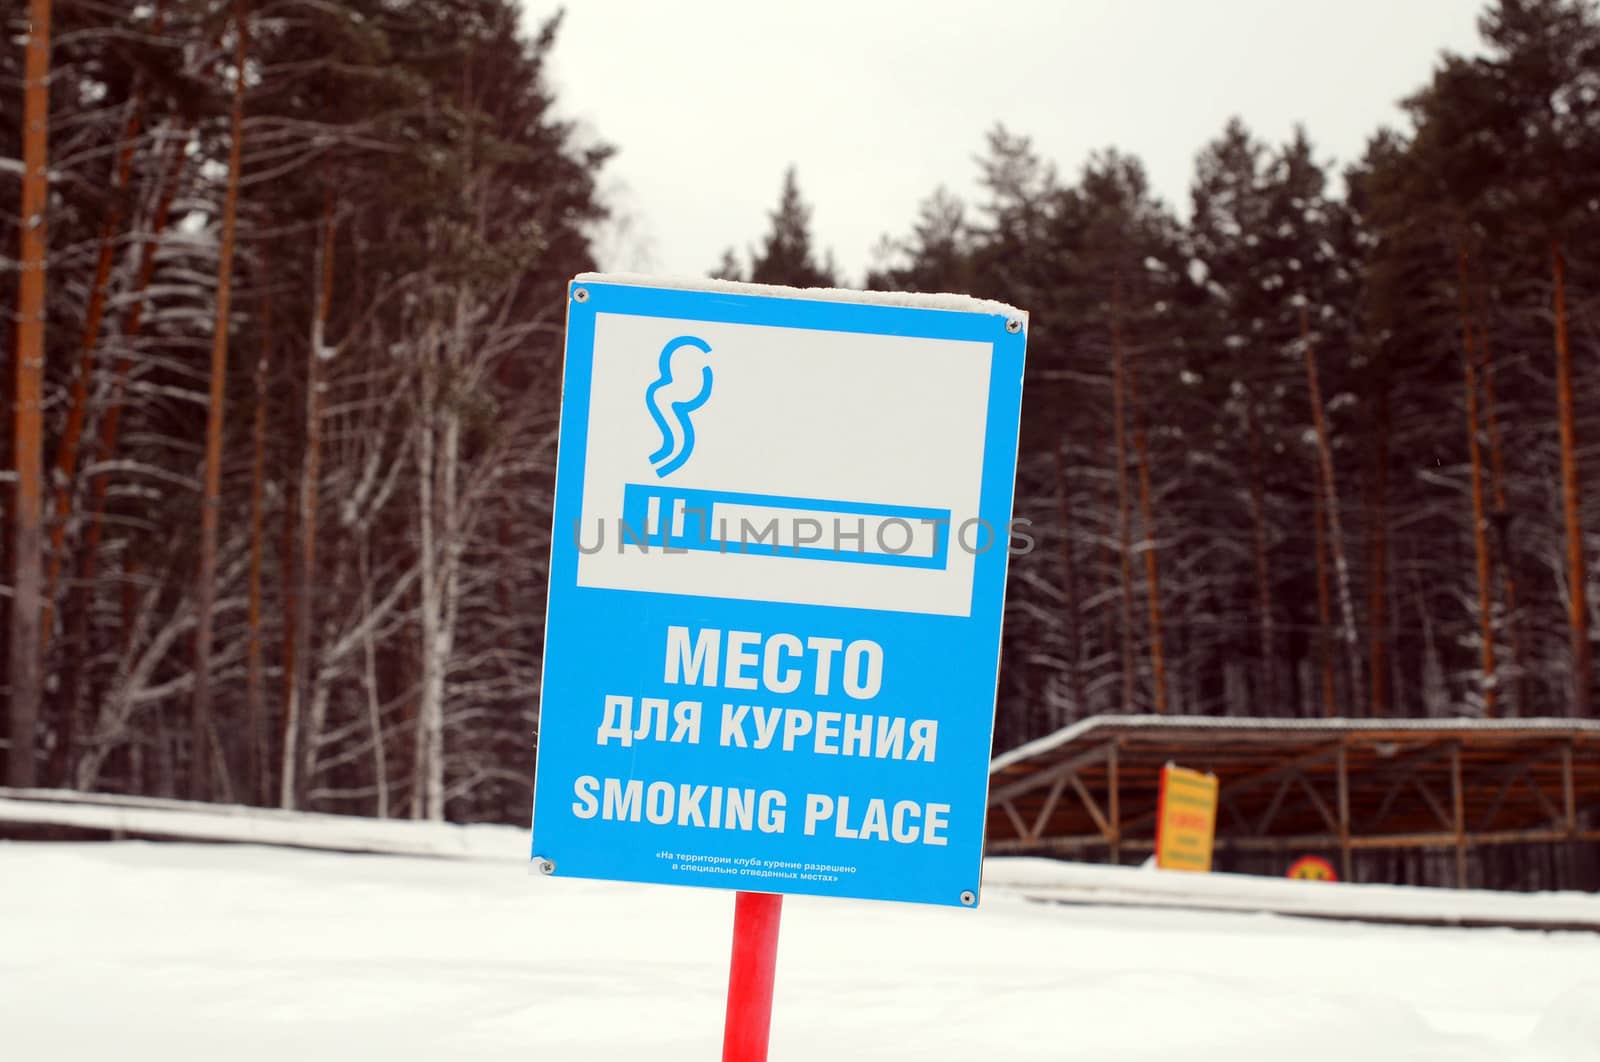 The sign "Smoking area" in country park. by veronka72